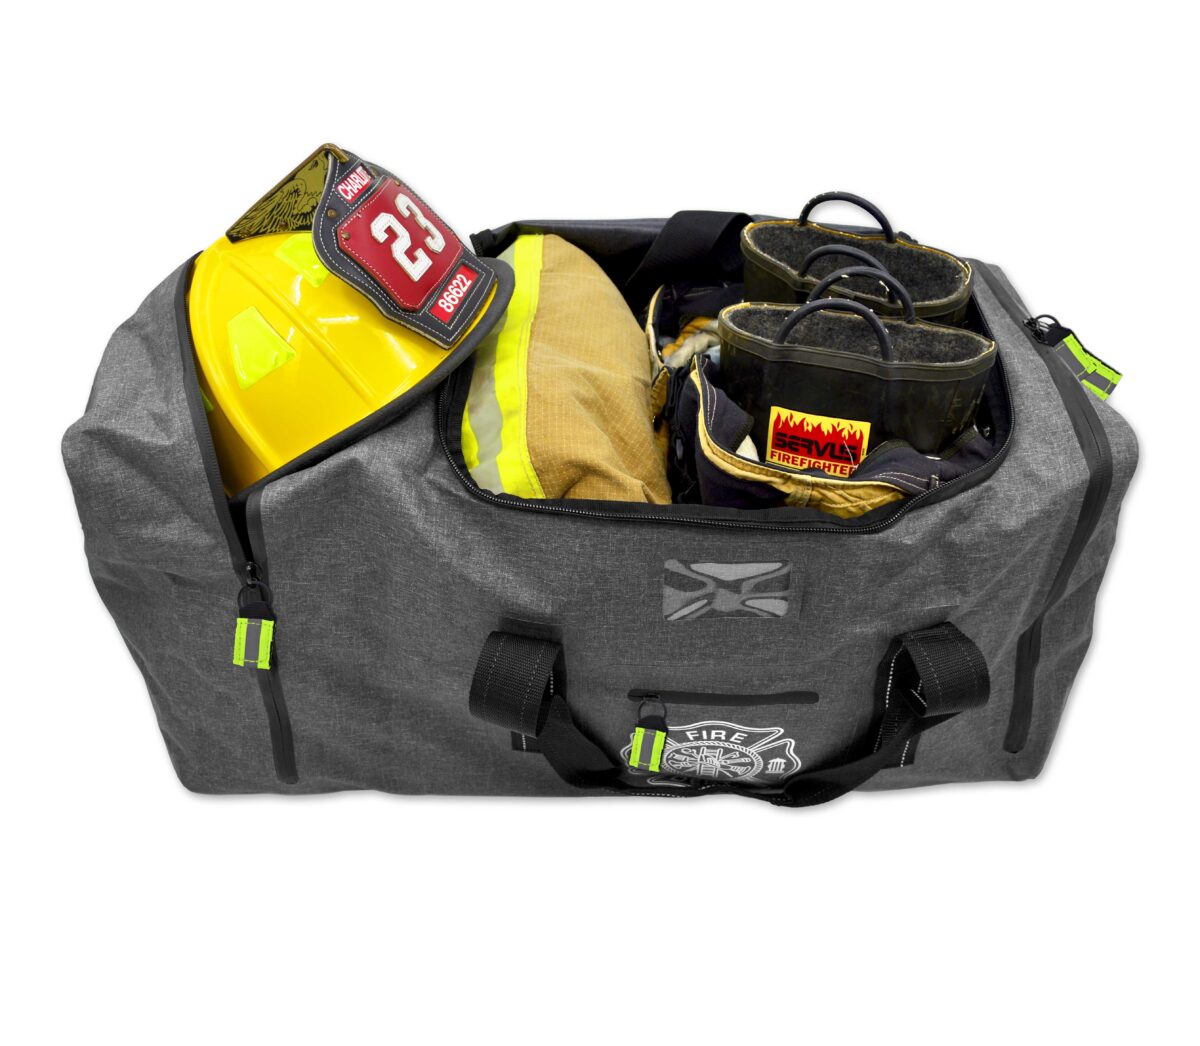 Open firefighter gear bag displaying its contents, including a yellow fire helmet with identification patches, a pair of black fire boots, and visible compartments, designed with reflective elements for safety, accessible for use by firefighters